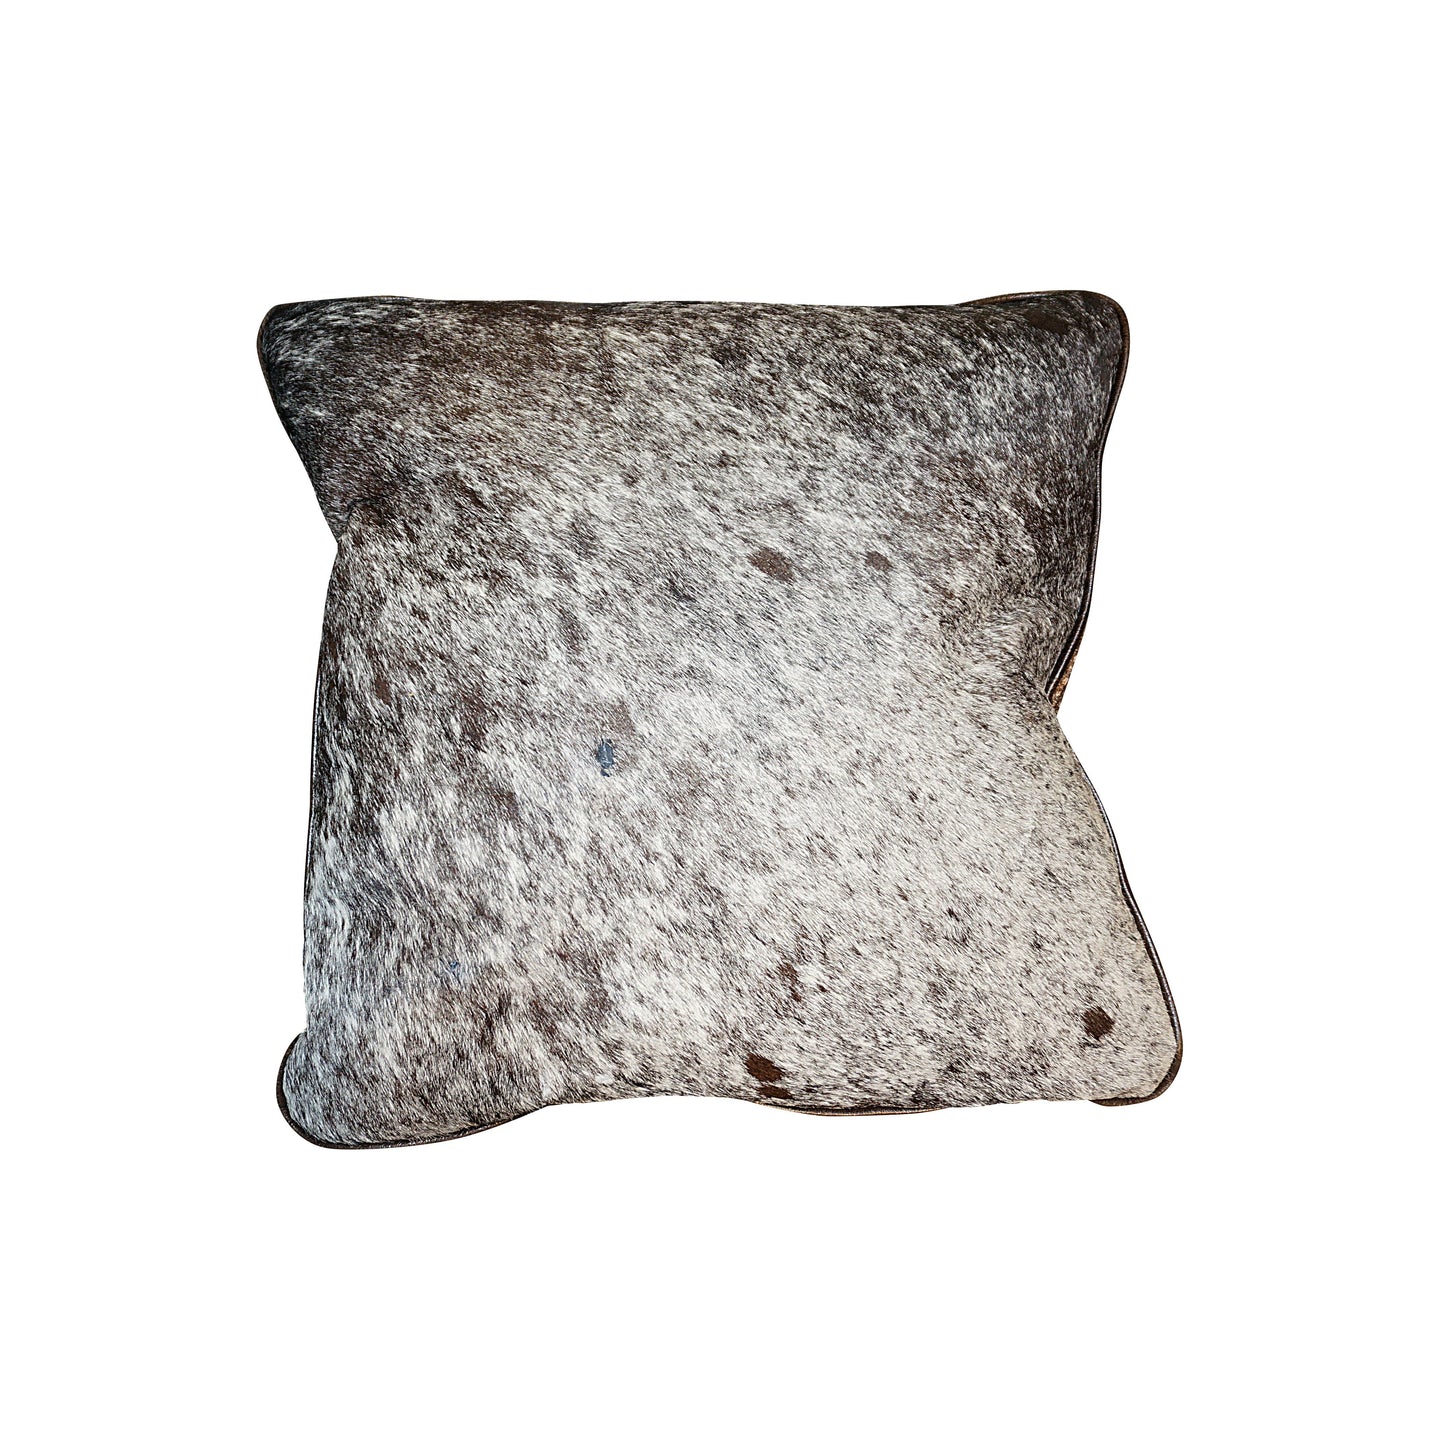 Cowhide Square Pillow